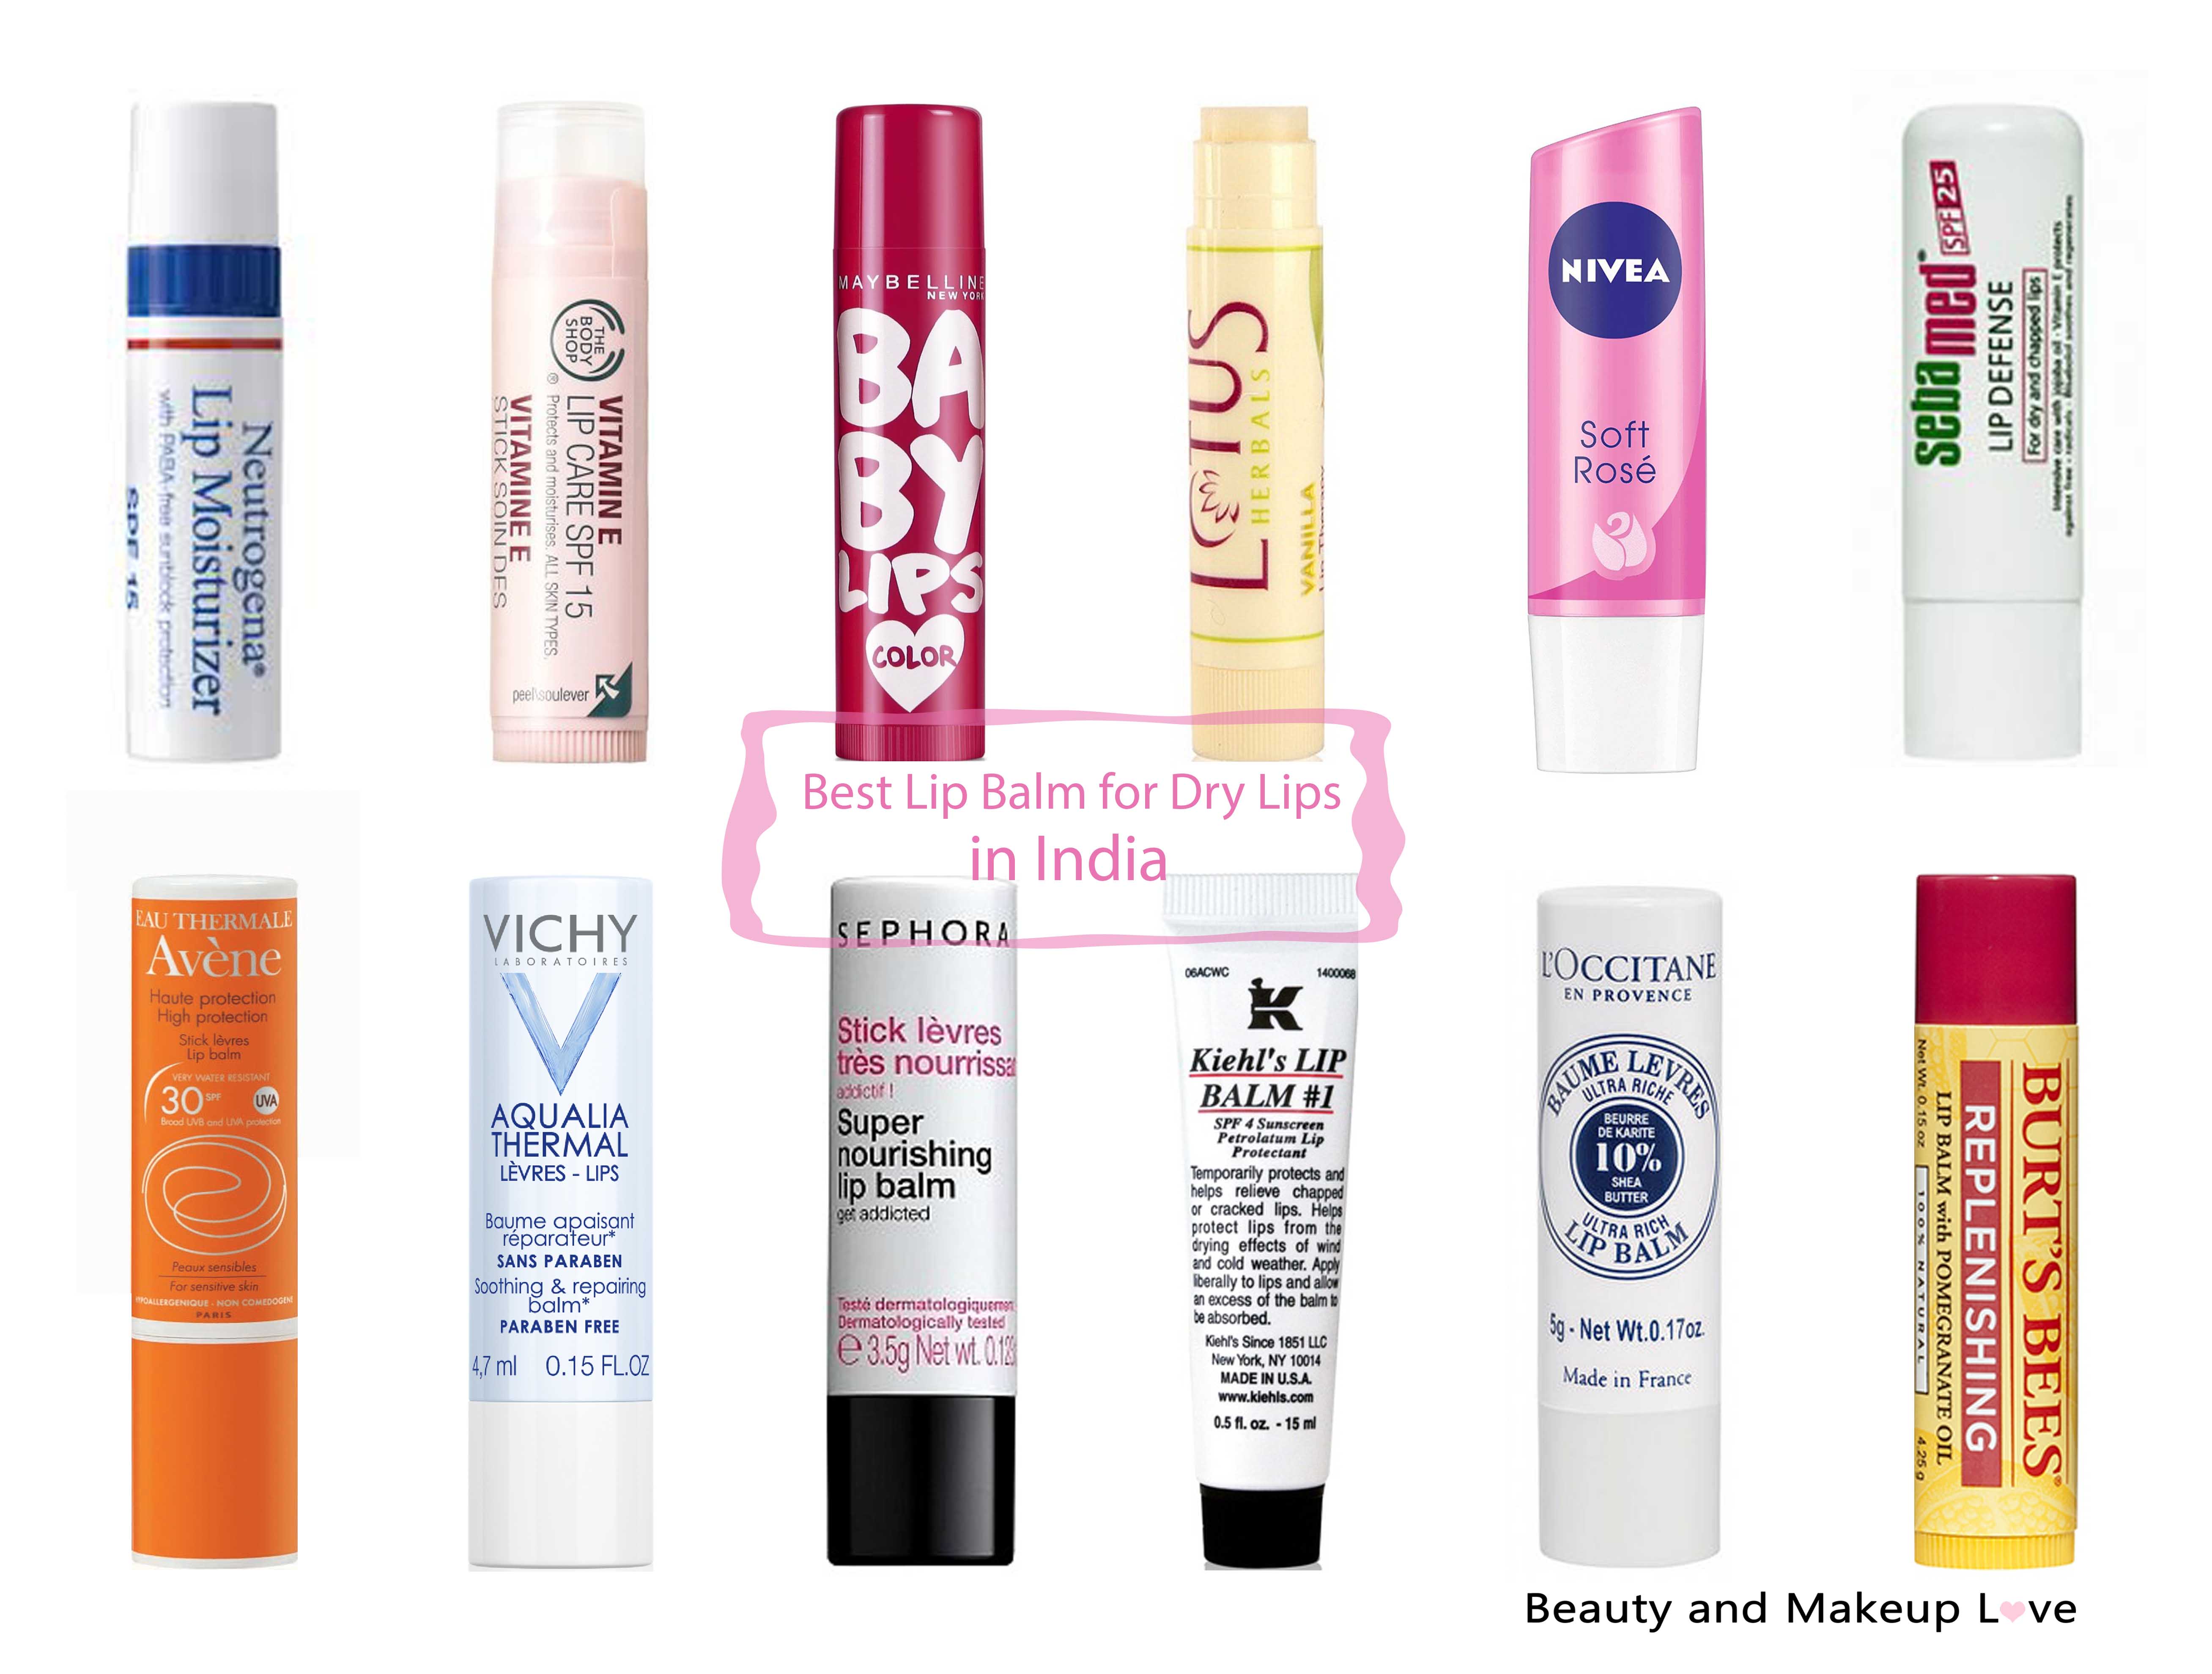 Best Lip Balm for Dry, Chapped Lips